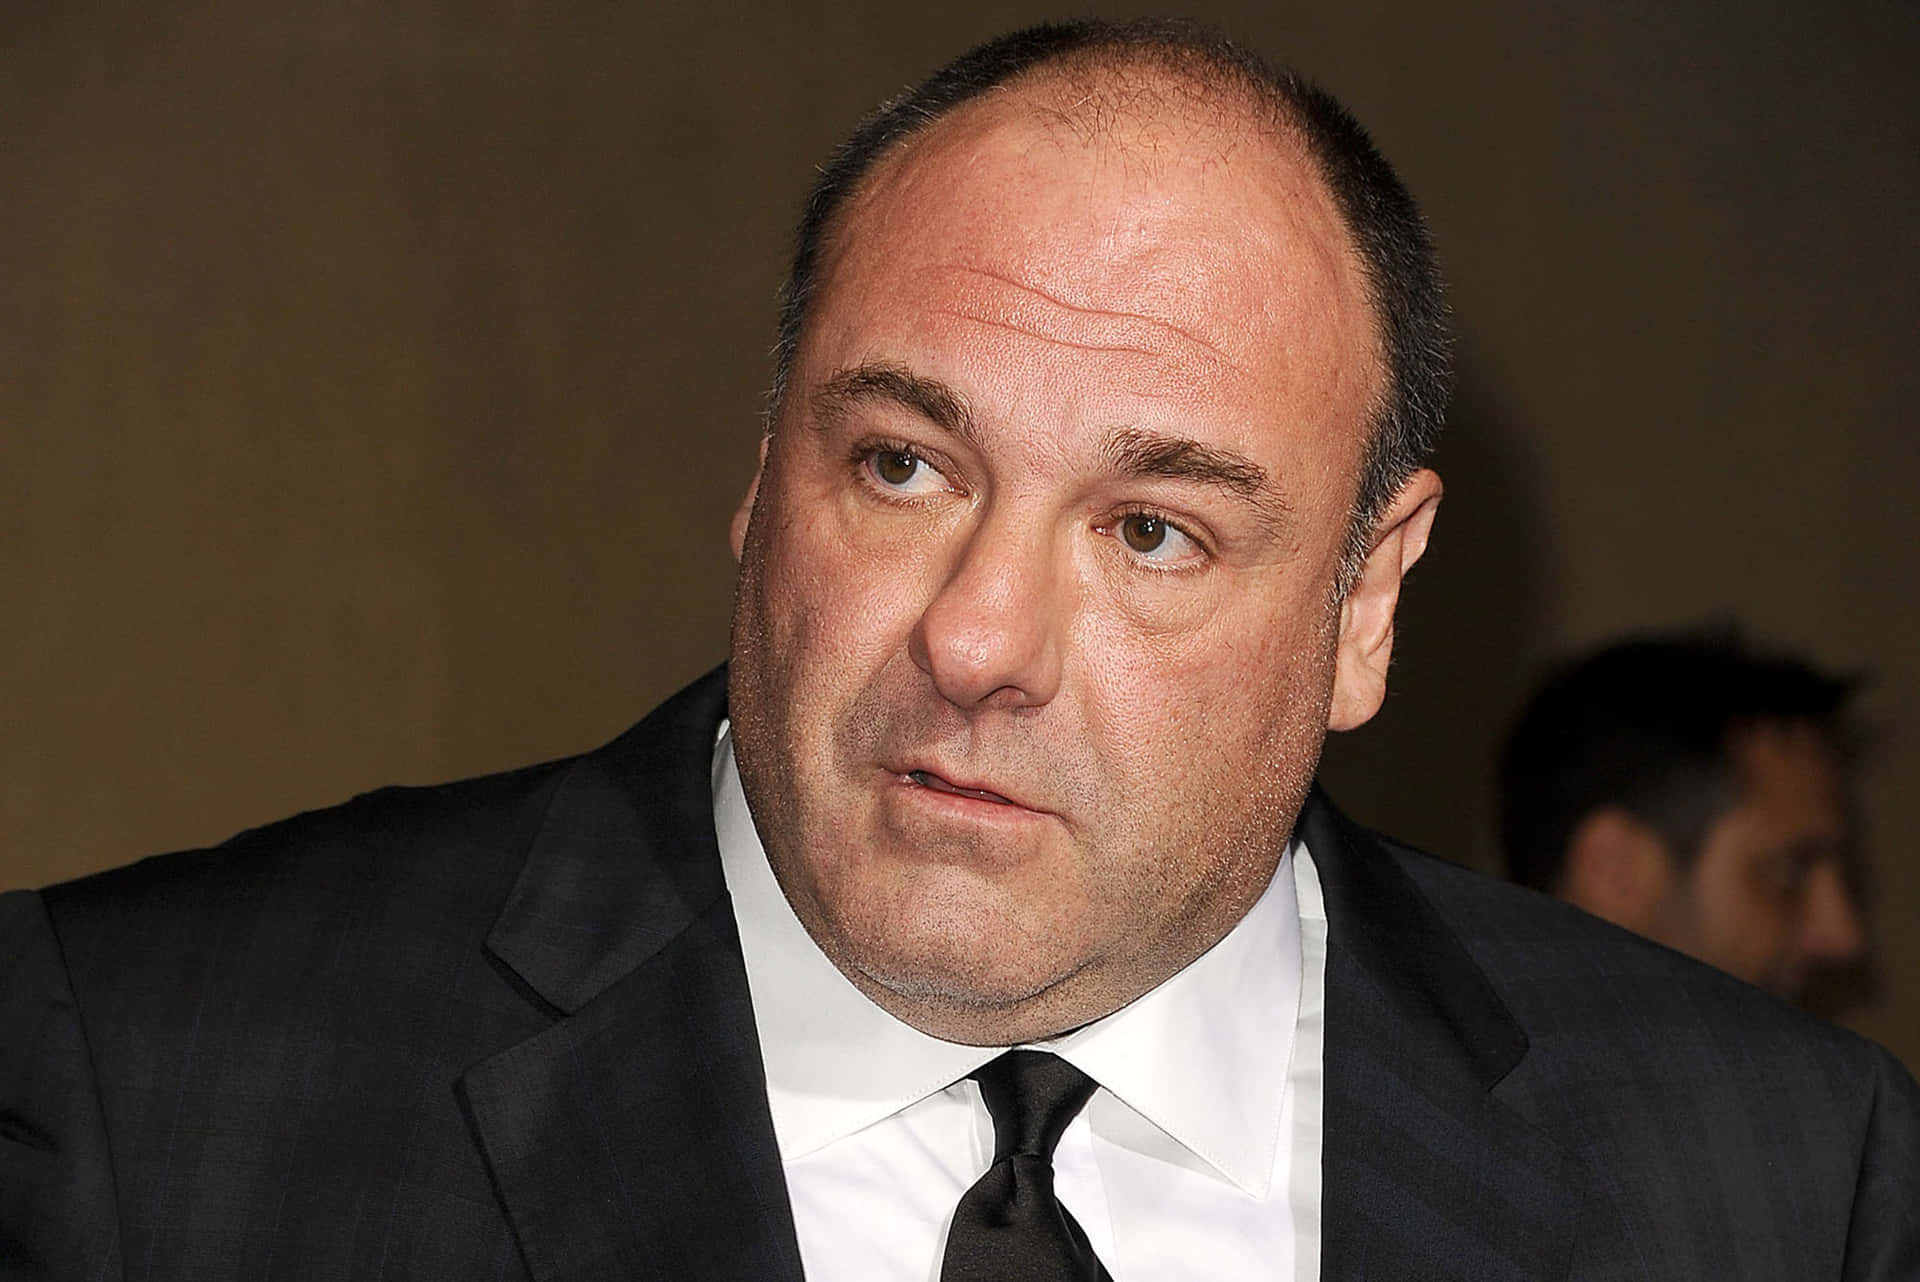 Jamesgandolfini Is An American Actor, Best Known For His Role As Tony Soprano In The Television Series 